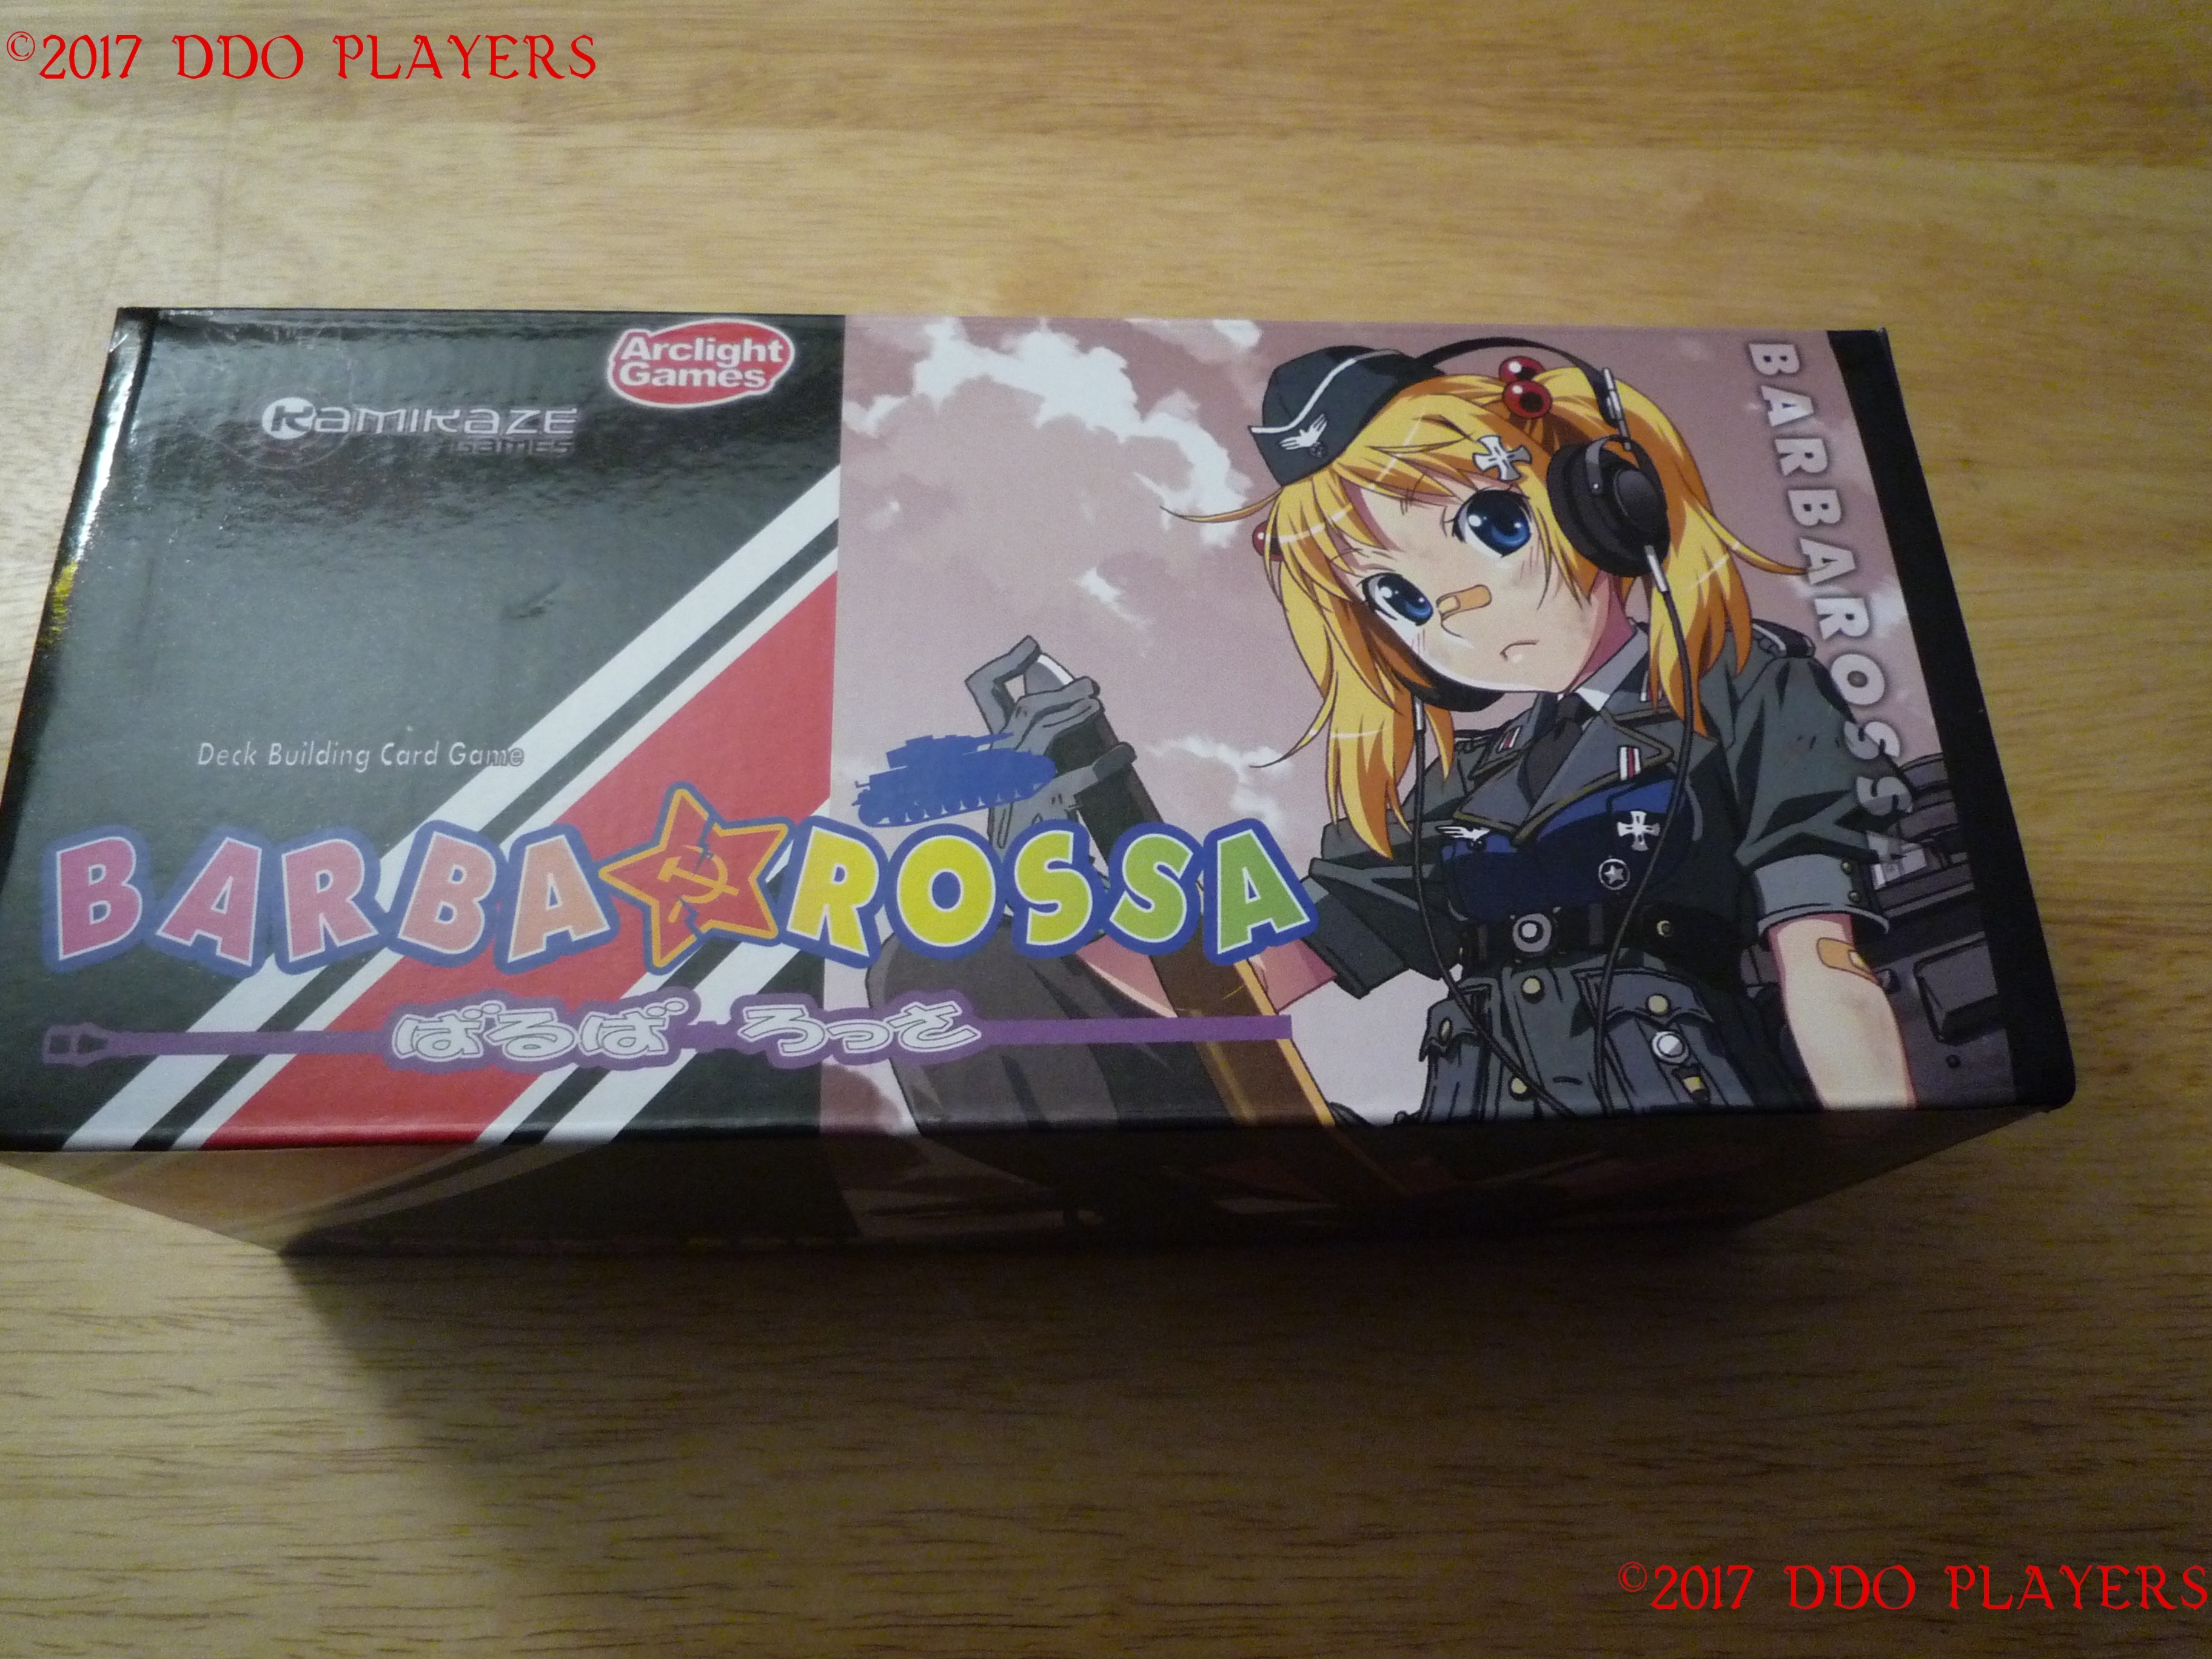 Barbarossa Card Game Review | DDO Players